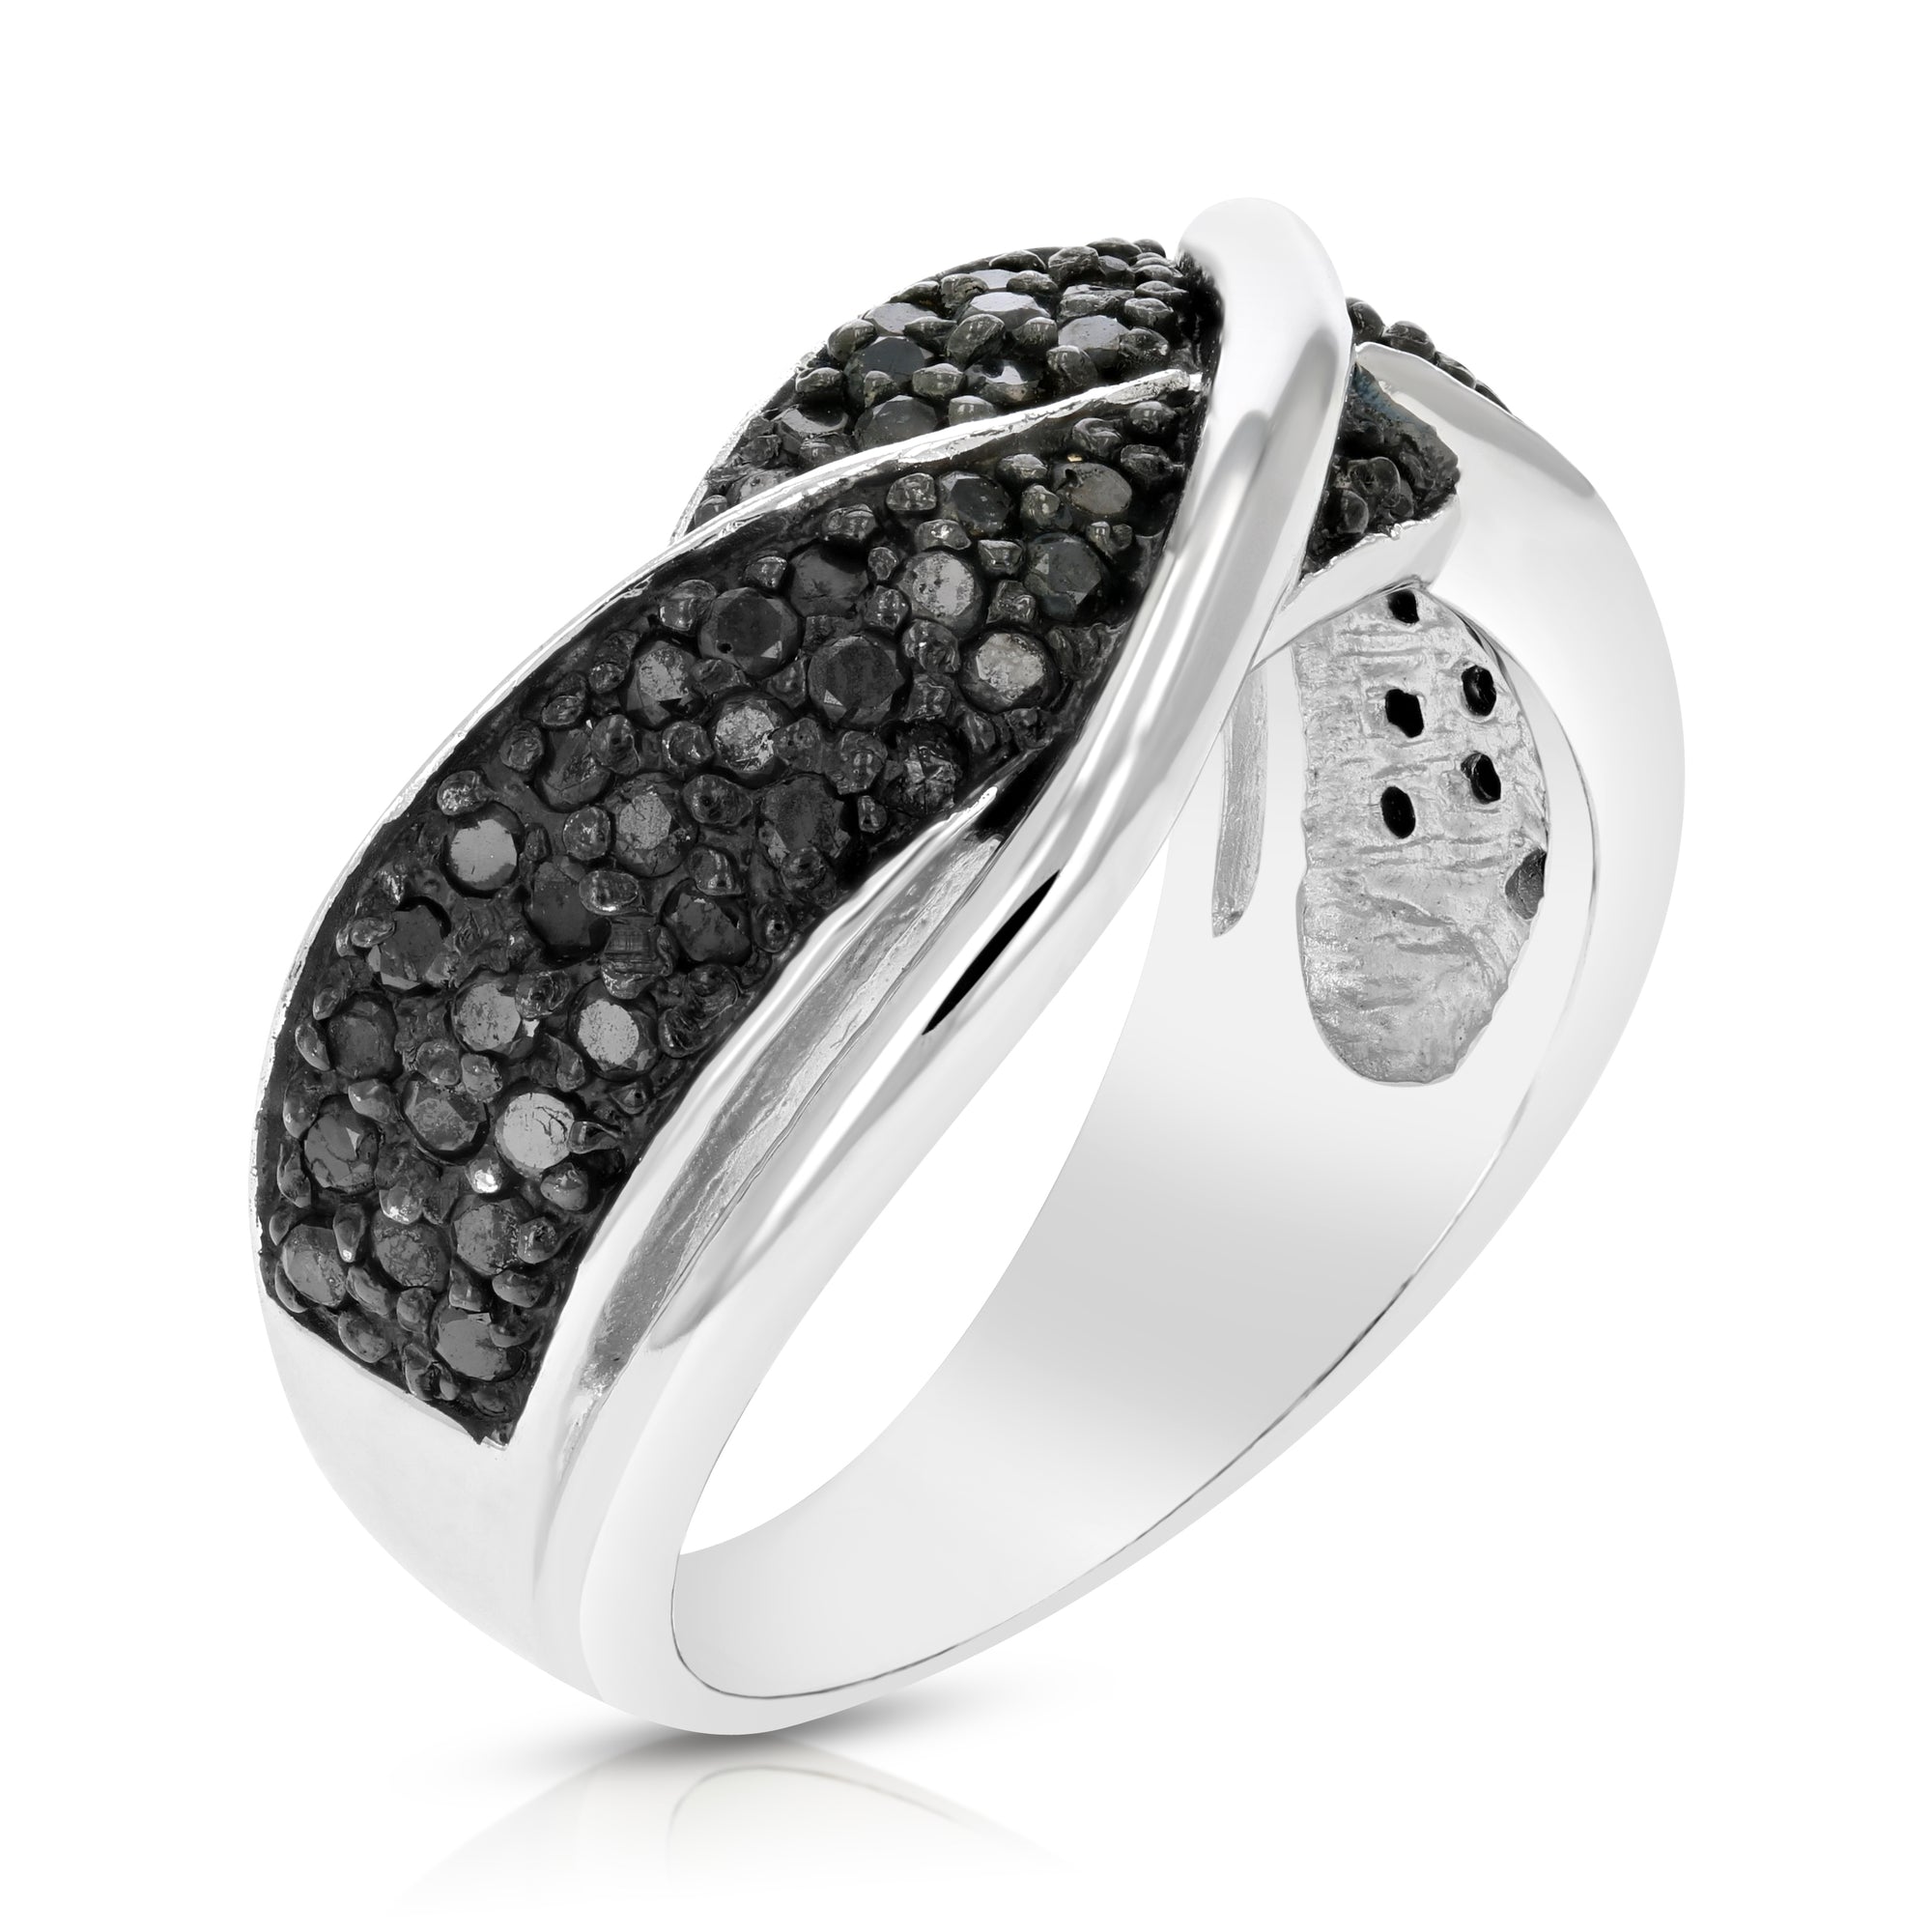 3/4 cttw Black Diamond Ring .925 Sterling Silver with Rhodium Plating Size 7